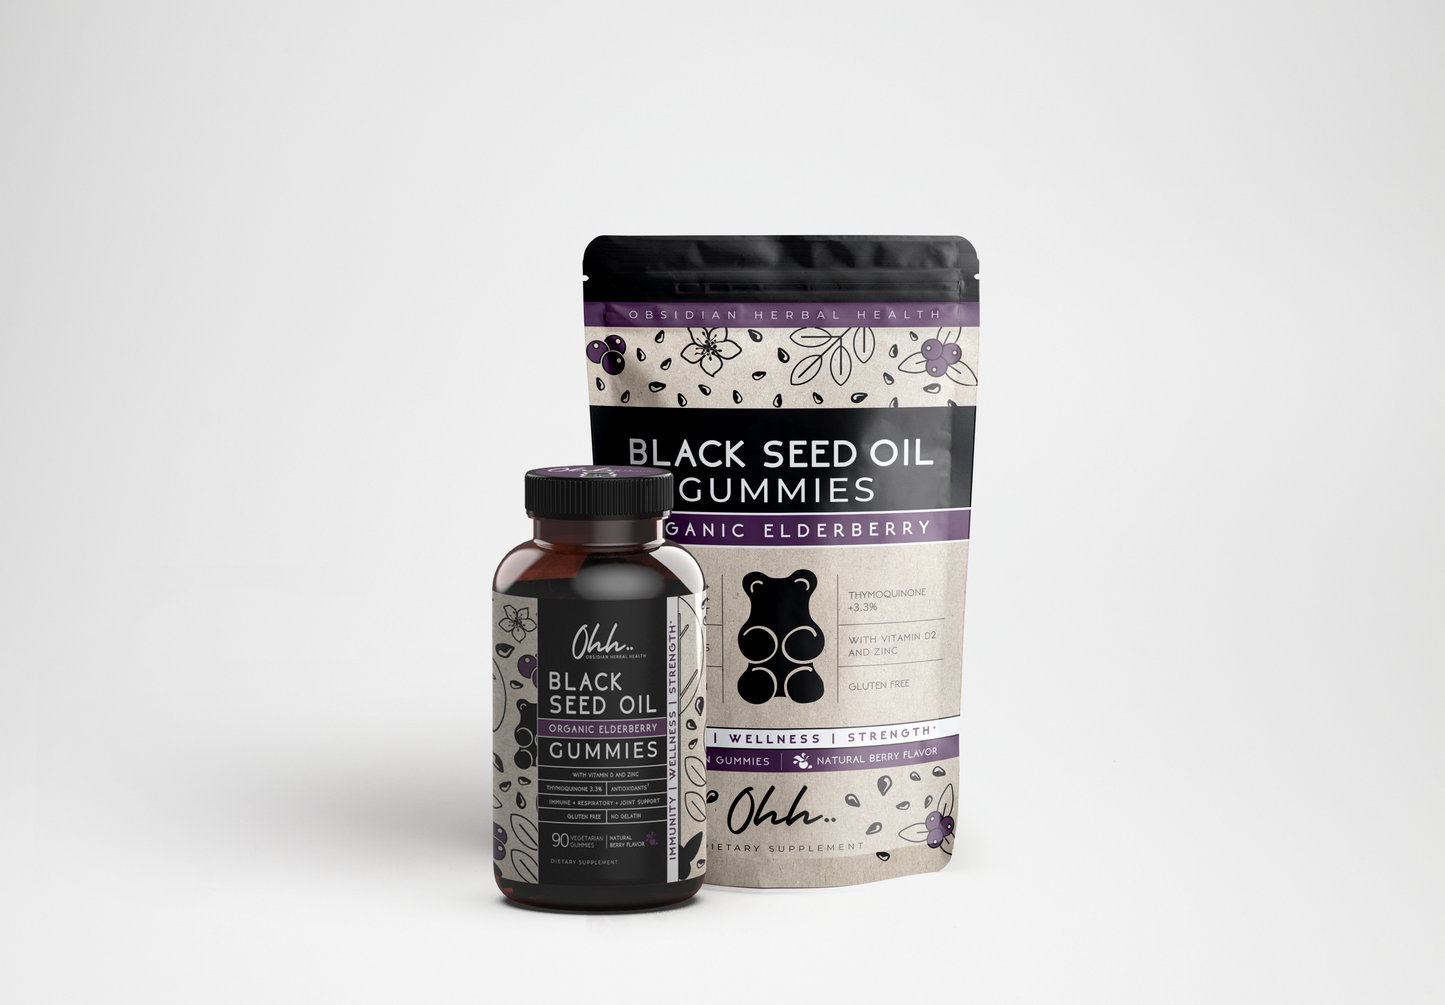 Organic elderberry gummies box contains a bottle with 90 gummies and a pouch with 15 gummies